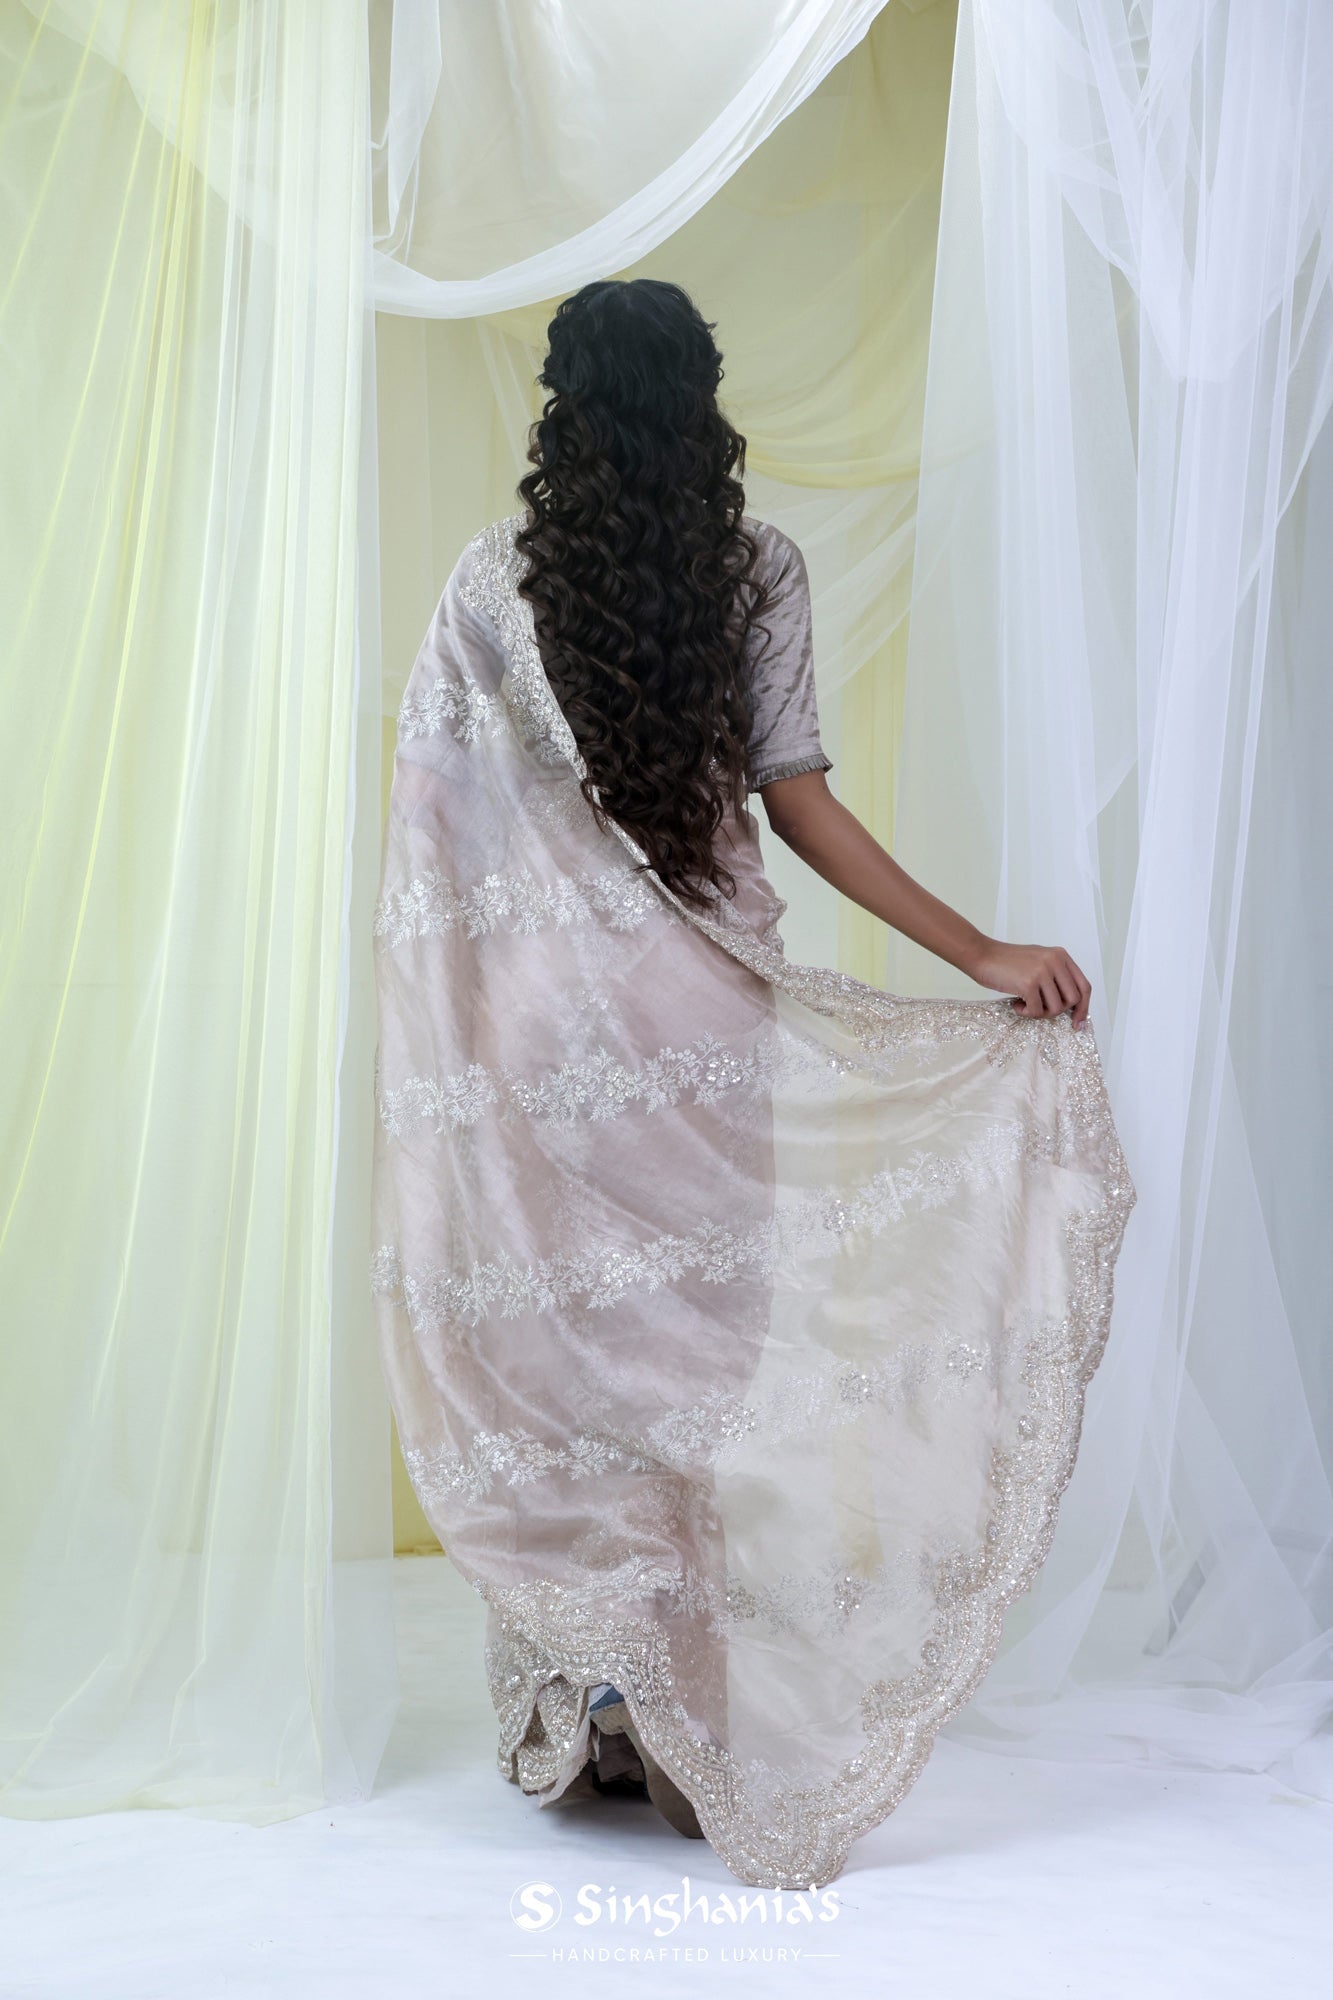 Sand White Tissue Saree With Hand Embroidery